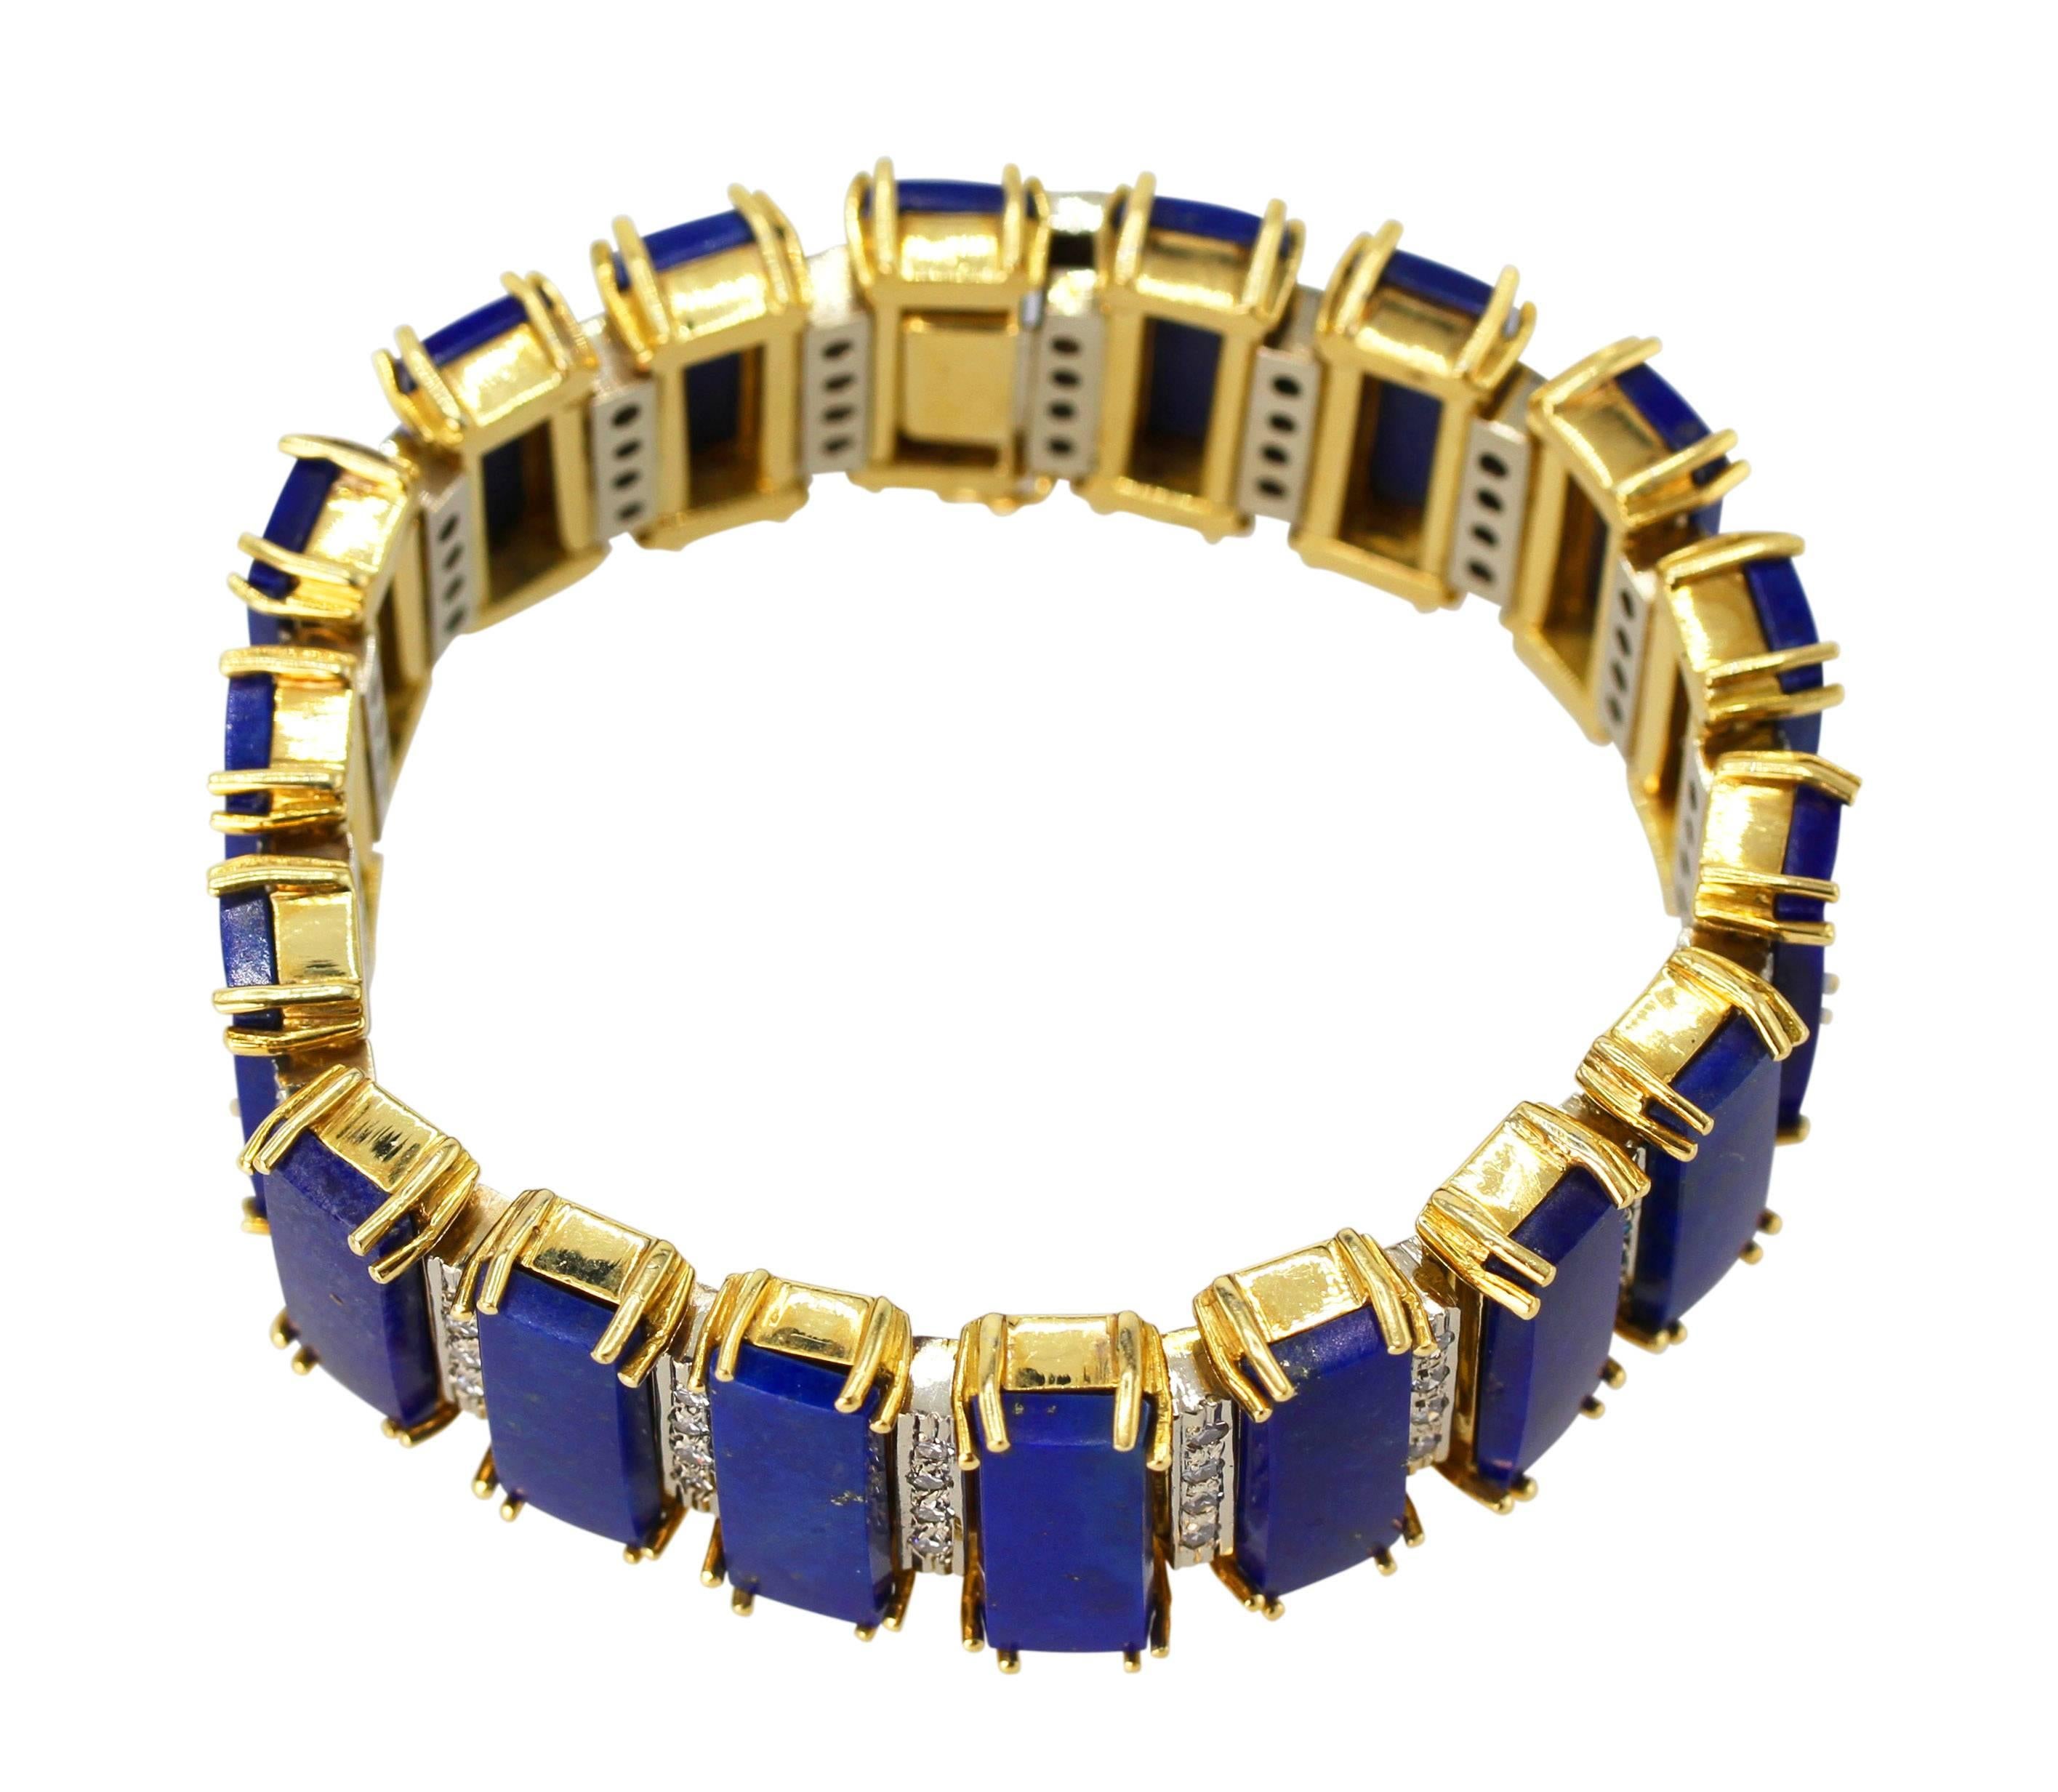 18 Karat Gold, Lapis Lazuli and Diamond Bracelet by Birks, Italy
• Signed Birks, Italy, K18
• 18 plaques of lapis lazuli
• 72 round single cut diamonds approximately 1.50 carats
• Length 6 3/4 inches, width 3/4 inch, gross weight 101.8 grams